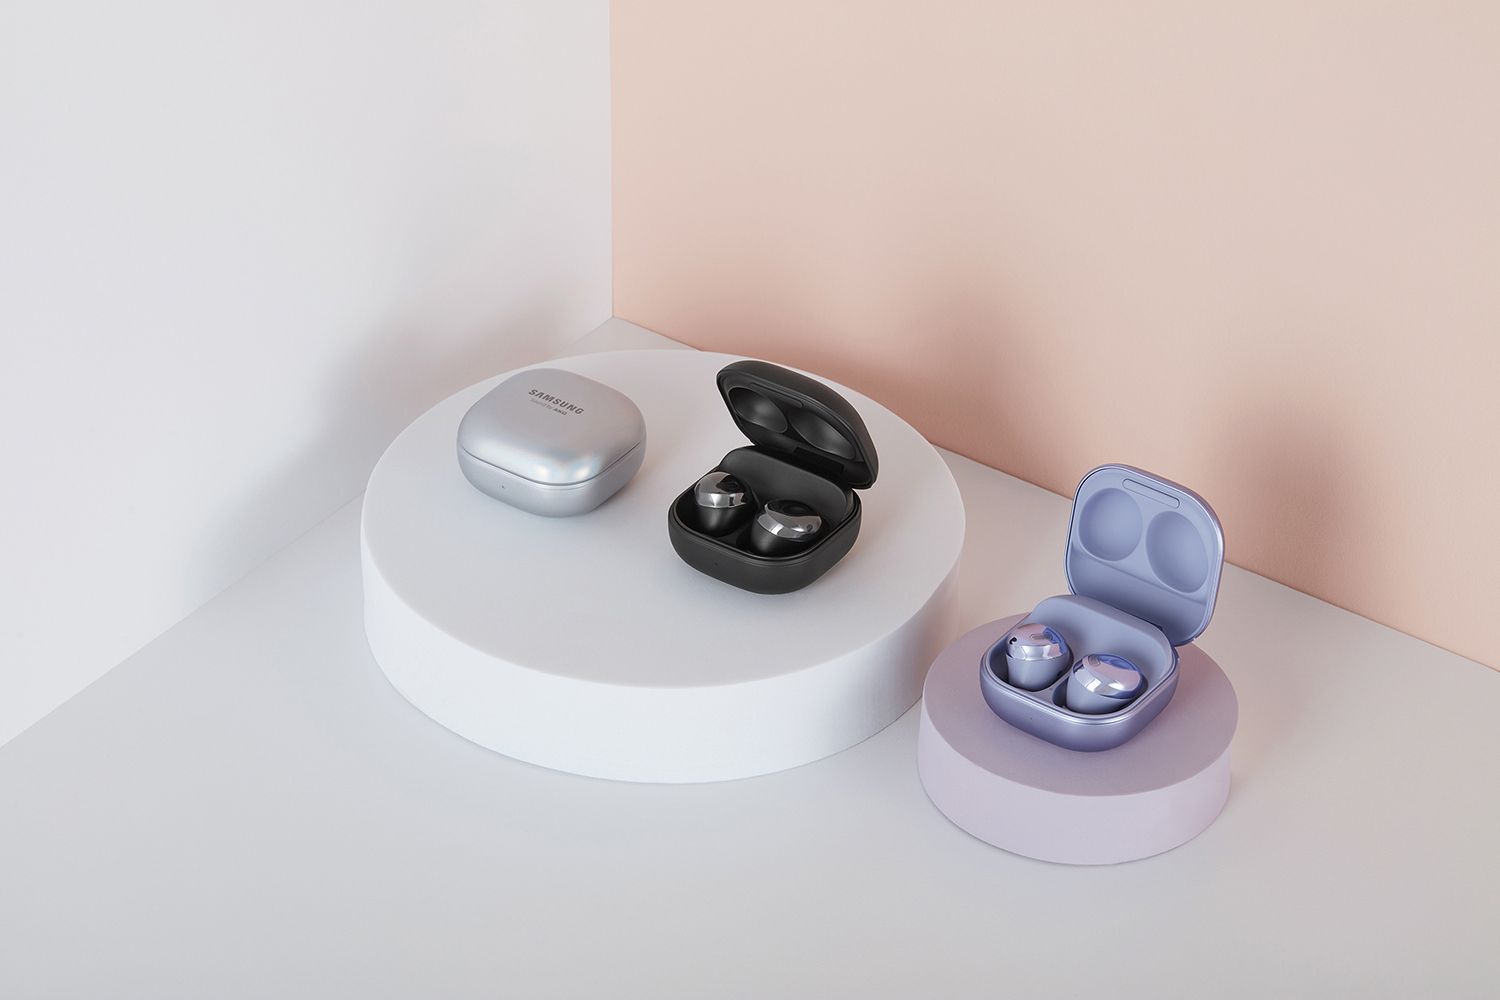 Samsung Galaxy Buds in Amazon Prime Day price cut